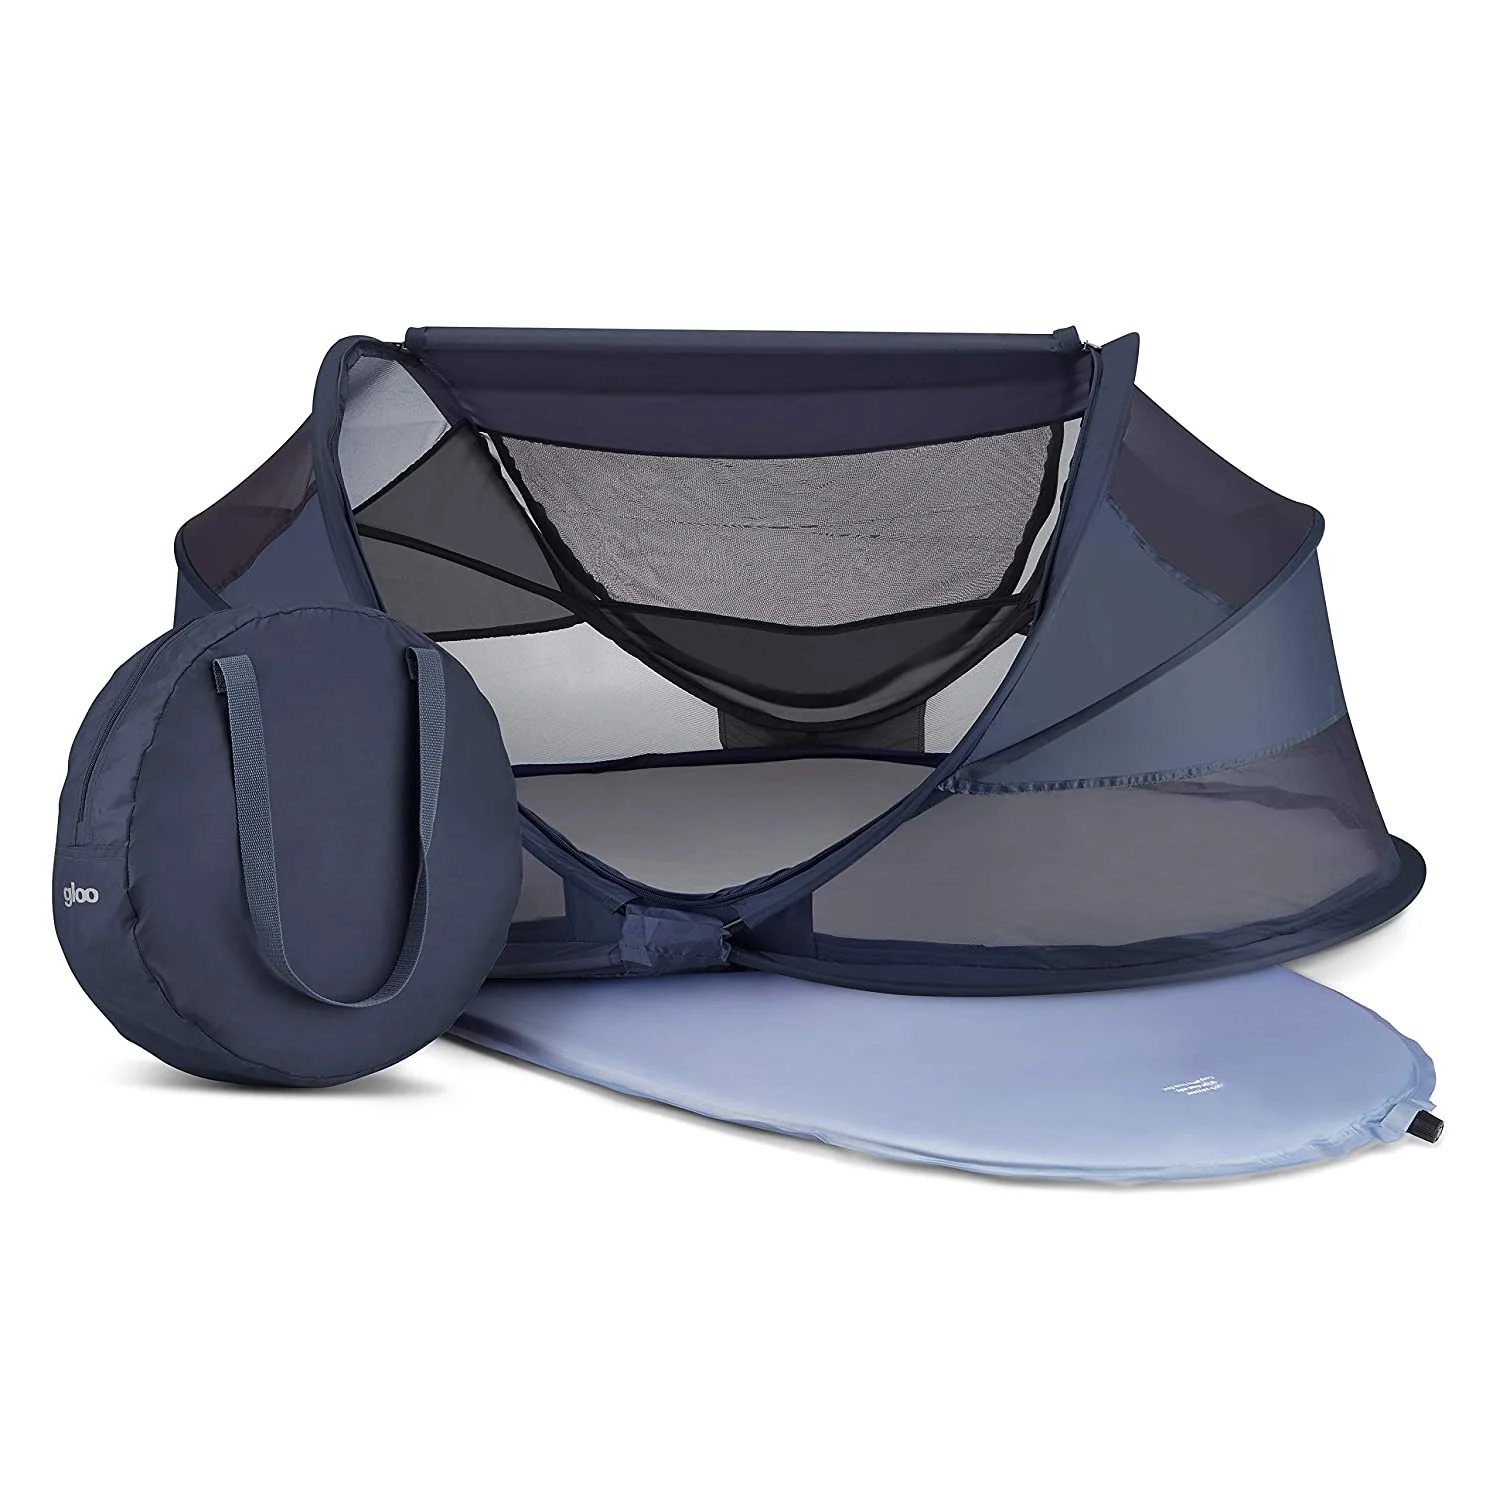 the joovy gloo portable tent creates a dark place for babies to sleep in hotel rooms and gives parents some privacy.